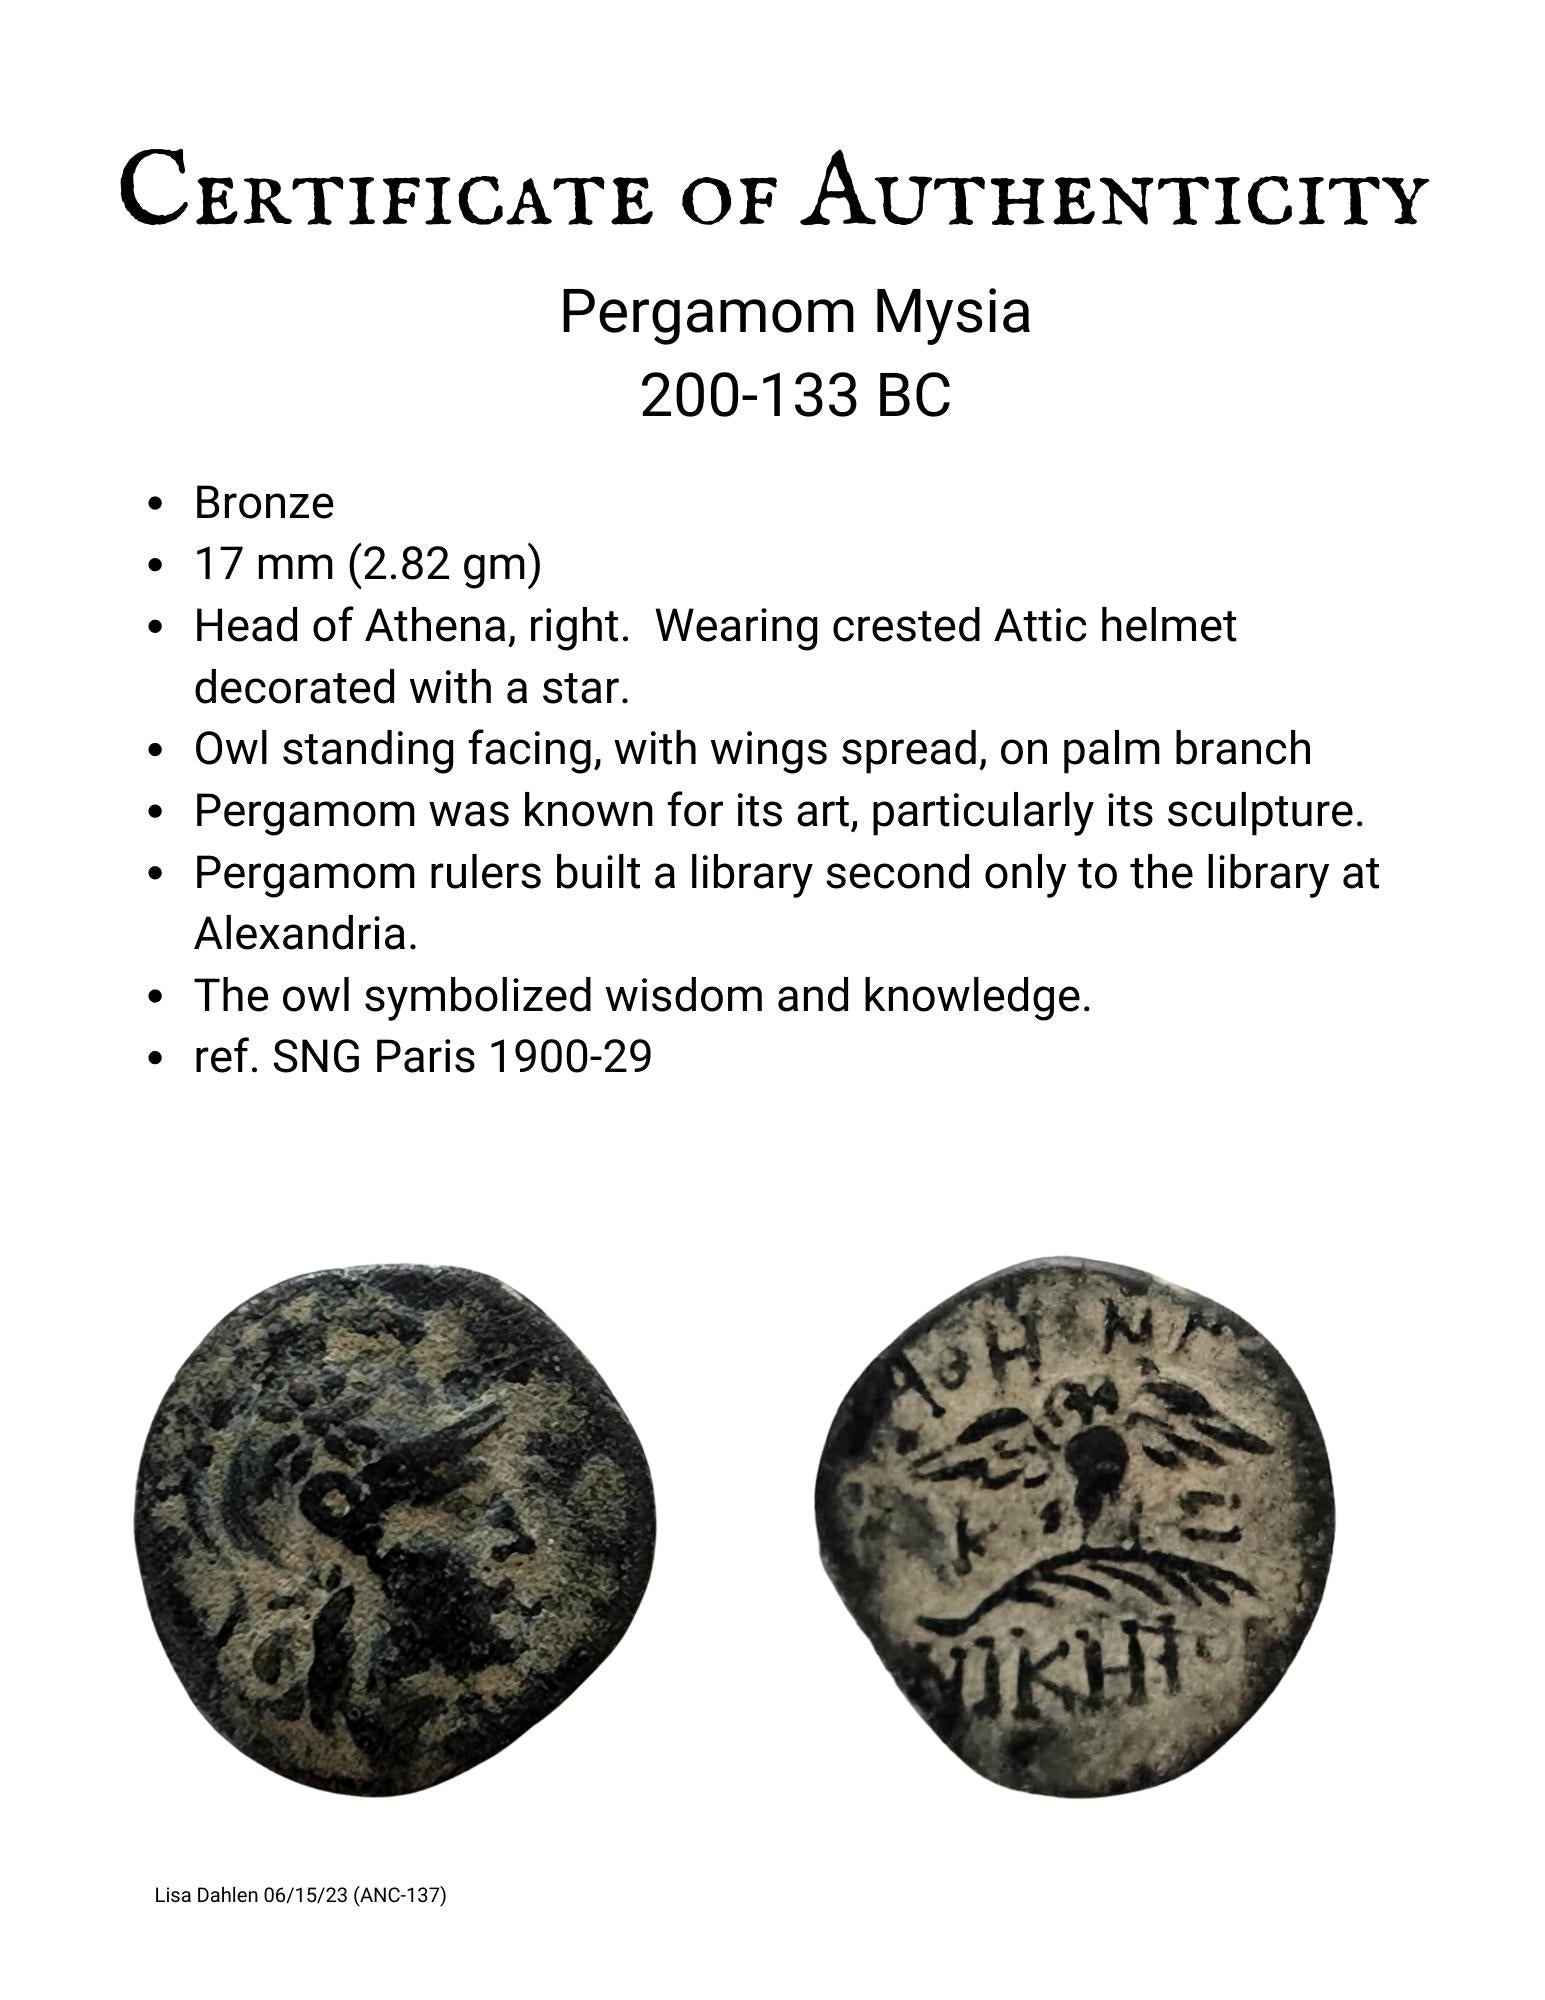 Certificate of authenticity of ancient Greek bronze coin from Pergamom Mysia 200-133 BC with Helmeted head of Athena and an owl with outstretched wings.